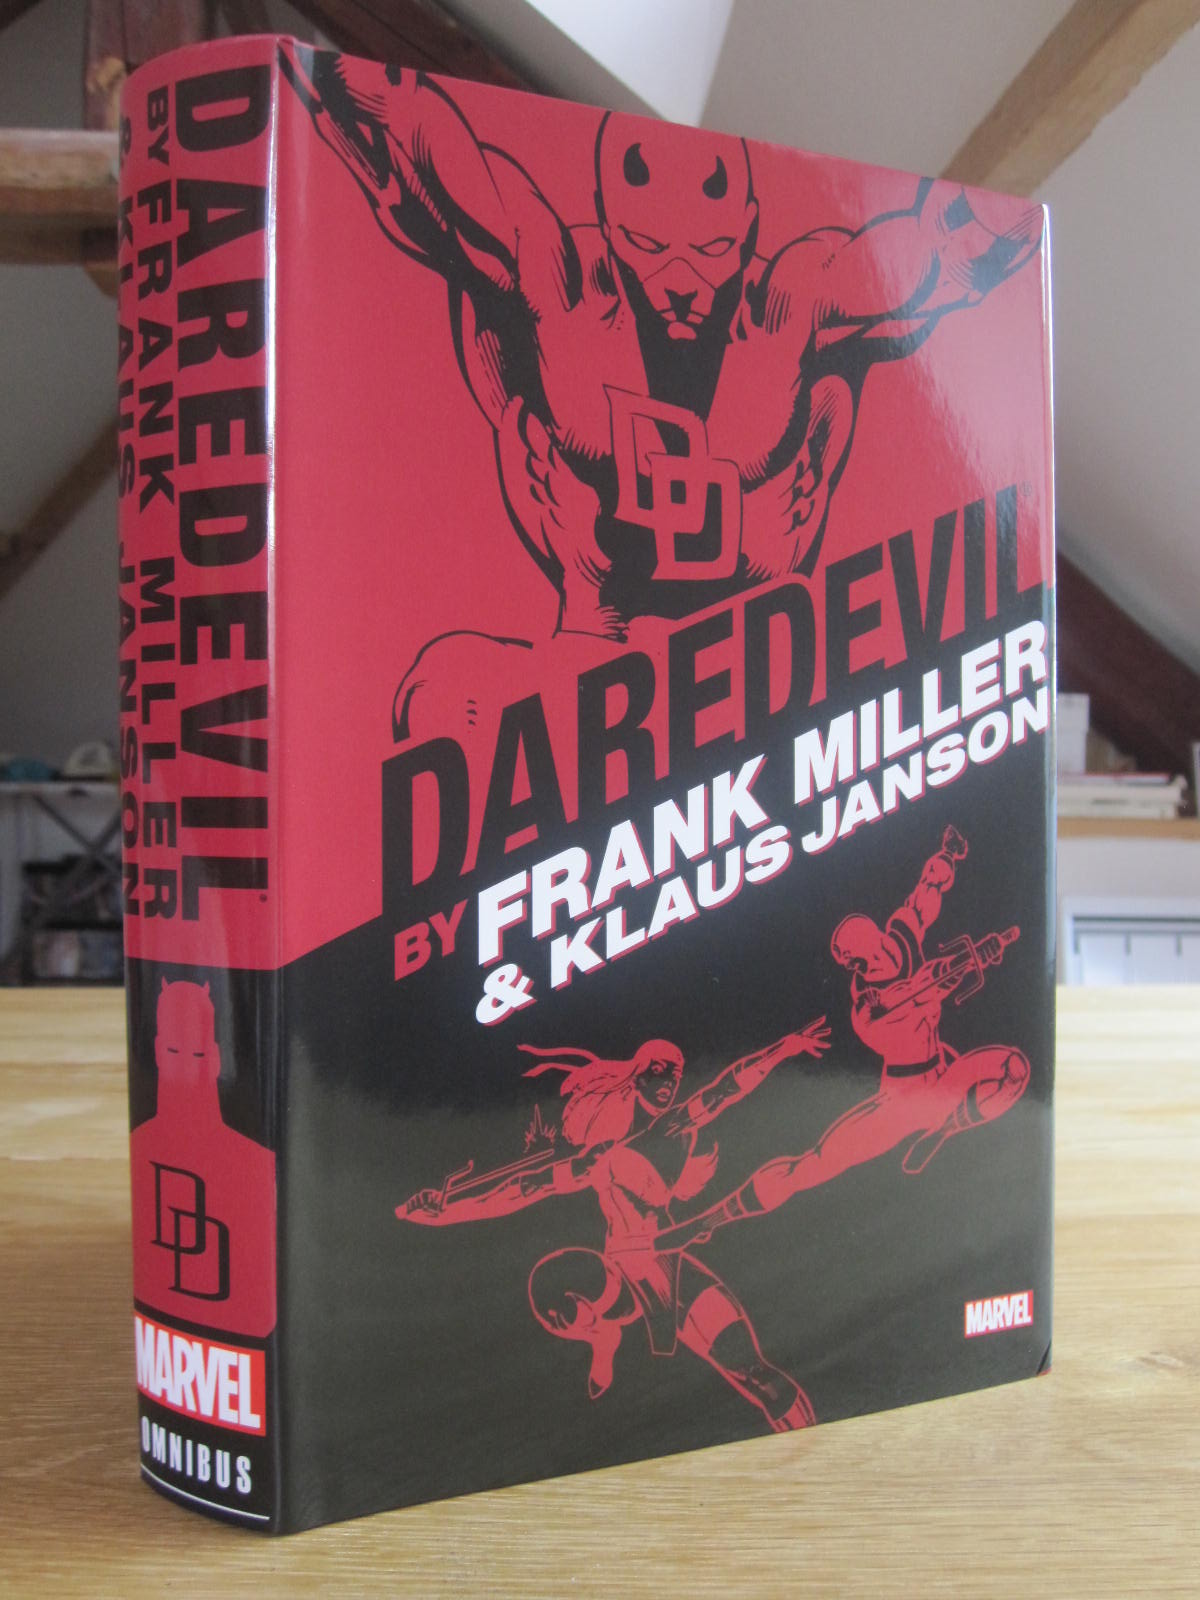 my absolute collection Daredevil by Frank Miller & Klaus Janson Omnibus